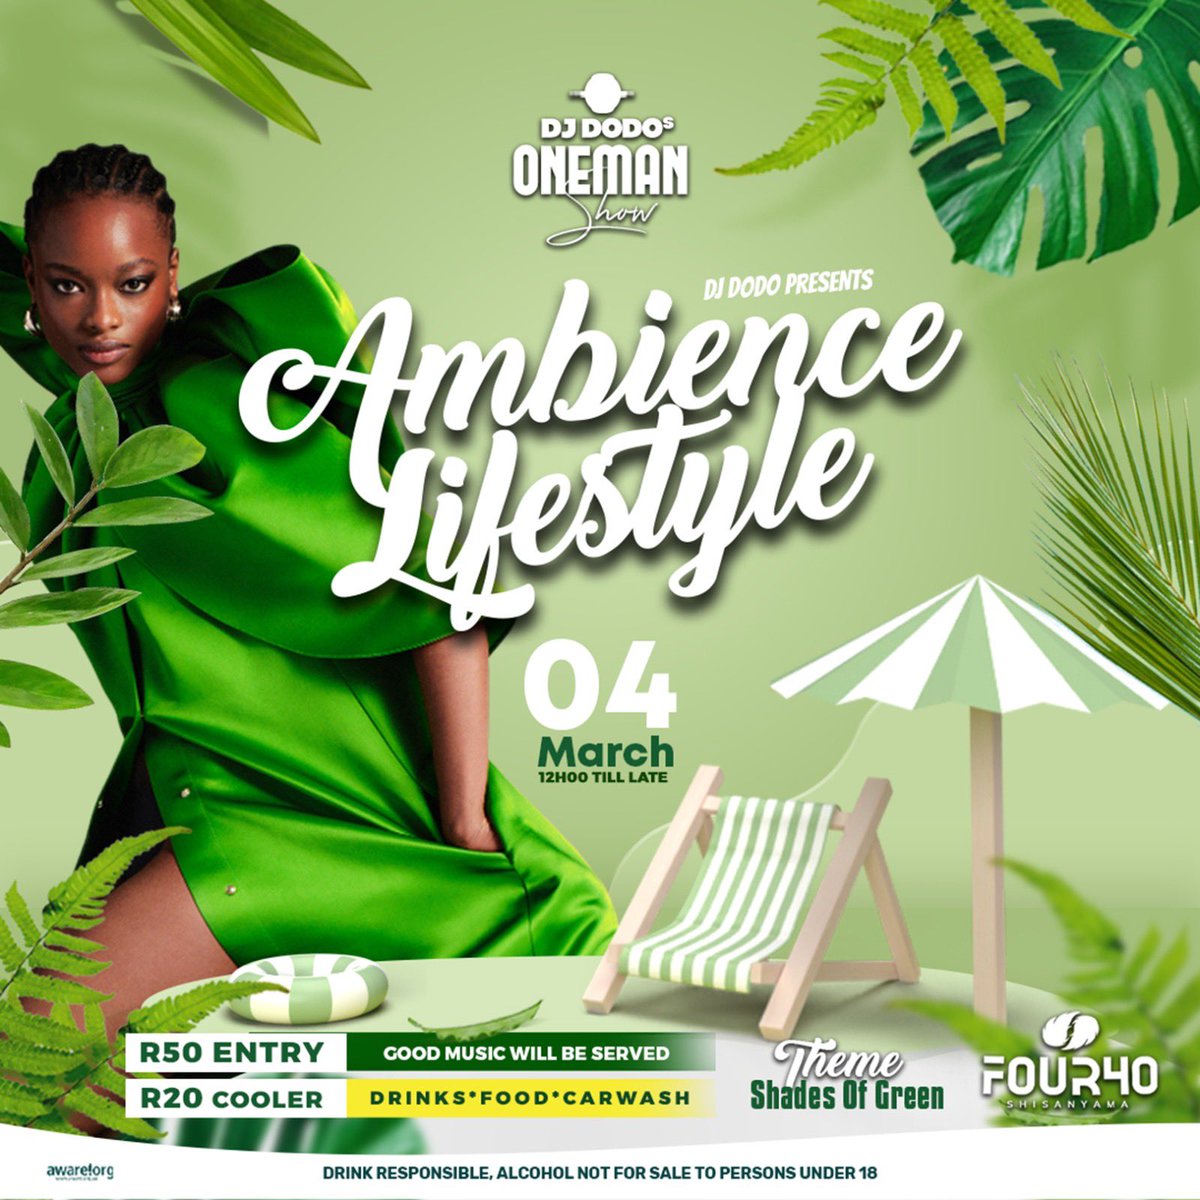 Life’s a party, make it memorable

Dj Dodo's One Man Show
Presents Ambience Lifestyle

Venue : Four40 ShisaNyama
Date : 04 March
Entry : R50
Cooler R20 (not allowed after 20h00)

Theme : Shades Of Green 
🟢💚🟢💚🟢💚🟢💚🟢

Anything Green
DopestMusicWillBeServed 

LineUpLoading…